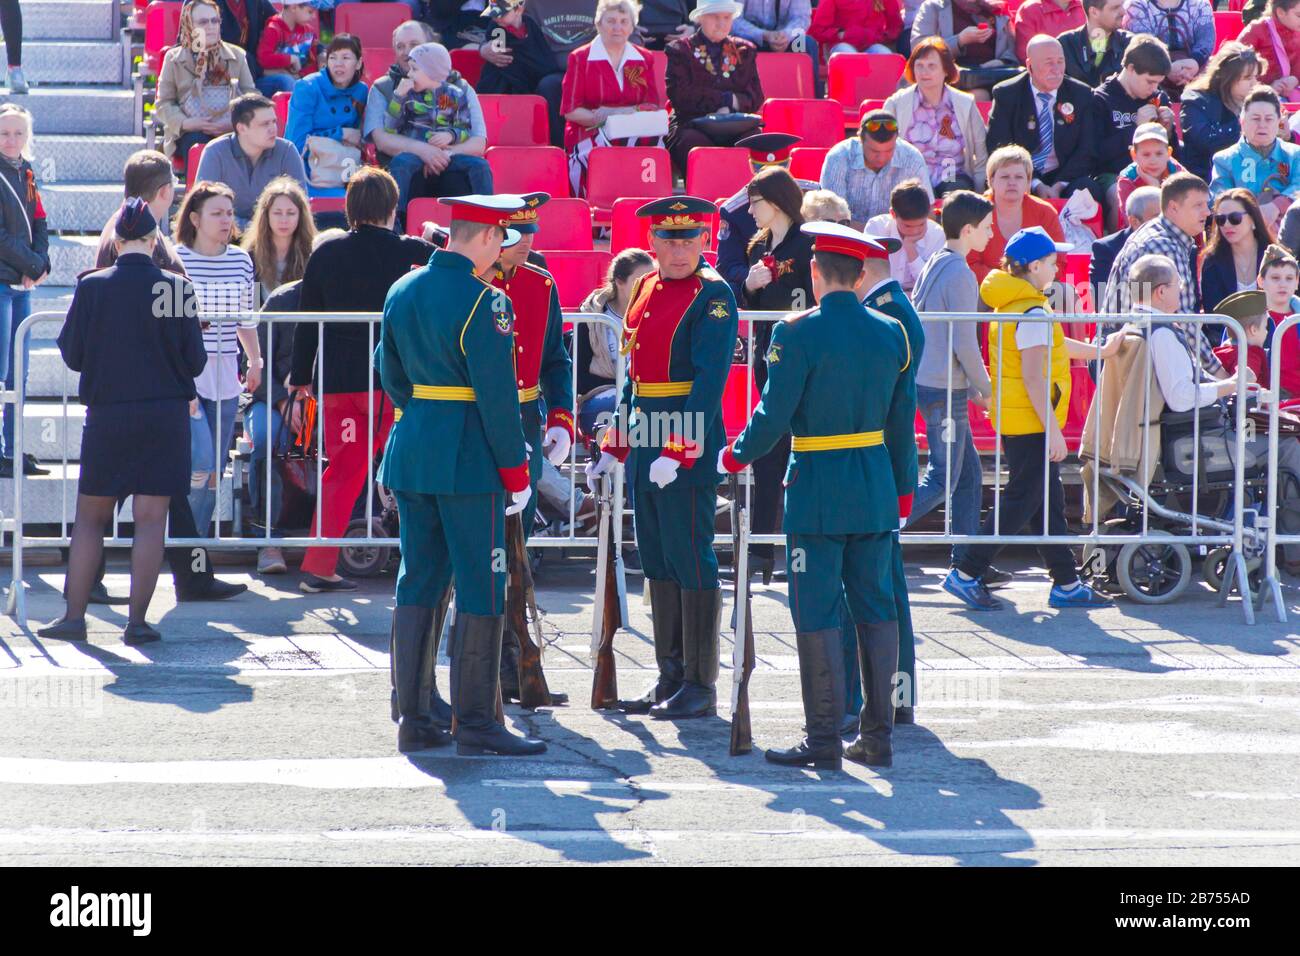 SAMARA, RUSSIA - MAY 9, 2016: Russian ceremony of opening military parade on annual Victory Day, May, 9, 2016 in Samara, Russia Stock Photo